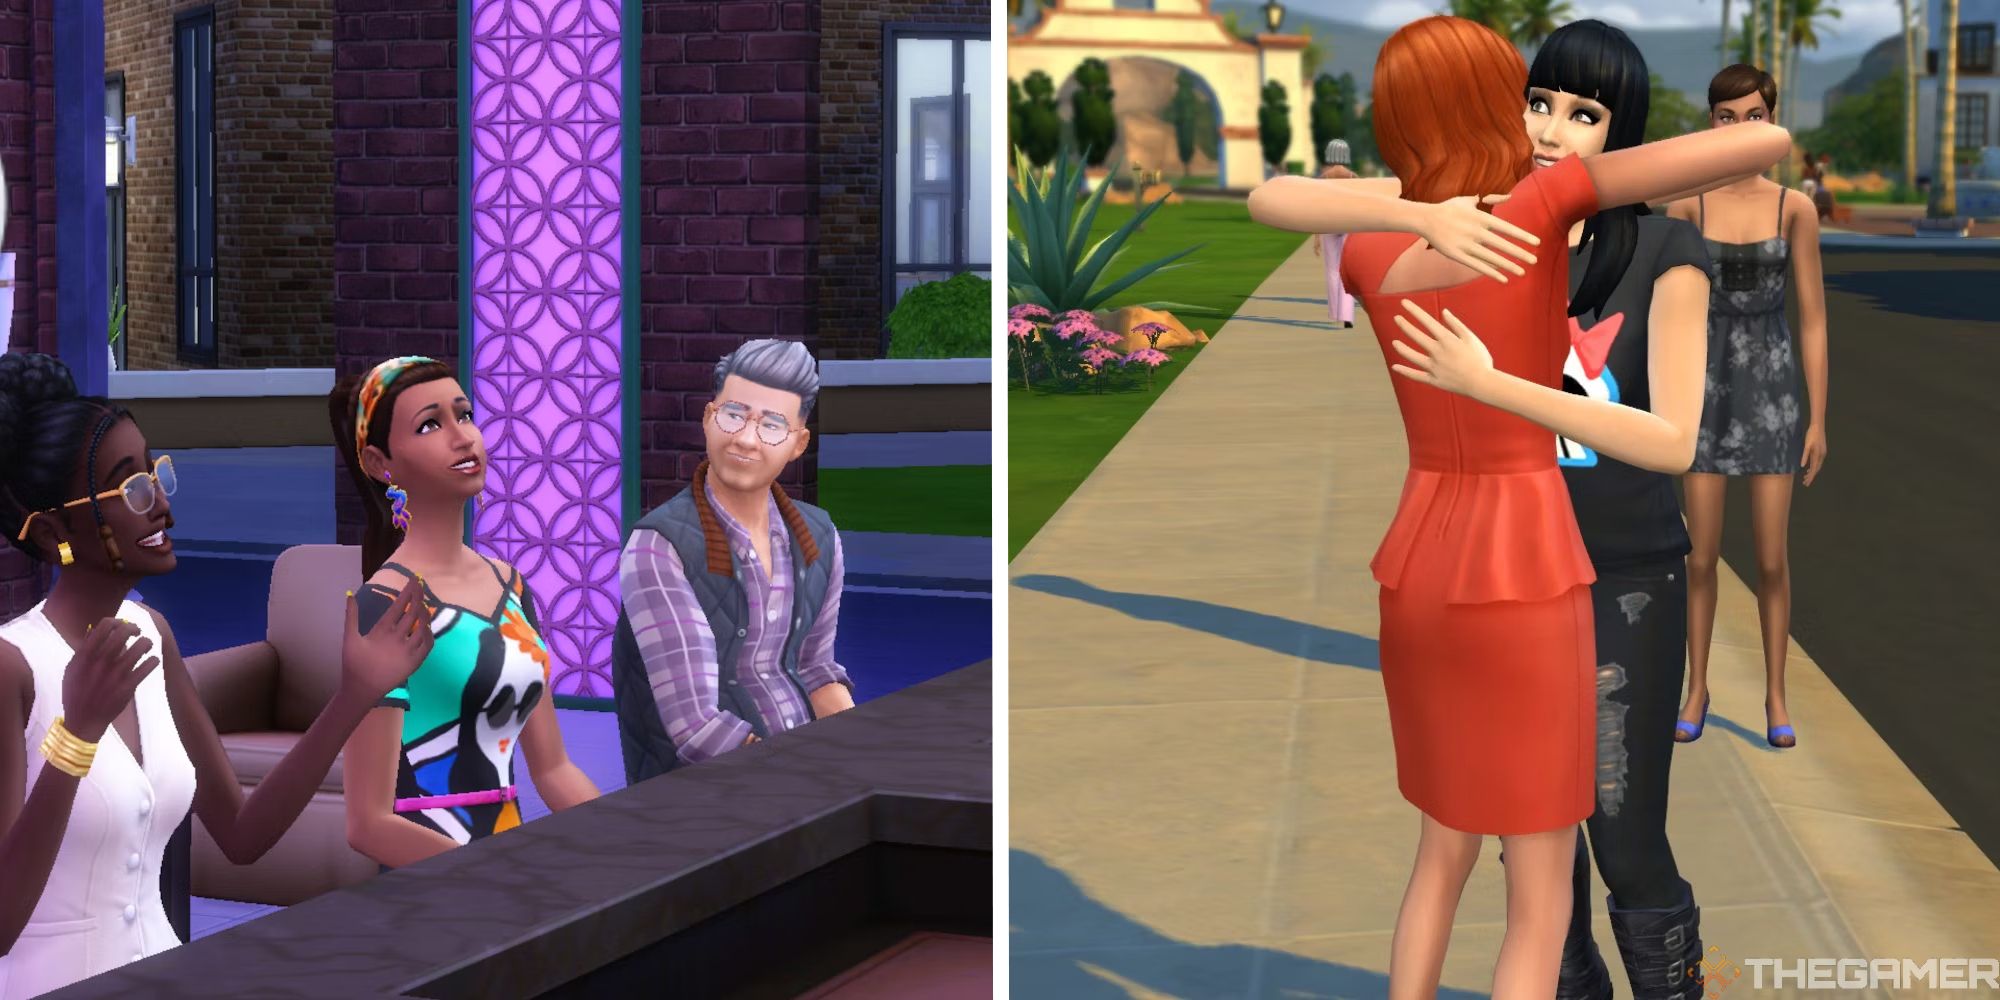 The Sims 4 relationship cheats: Max out friendship, romance, pets & more